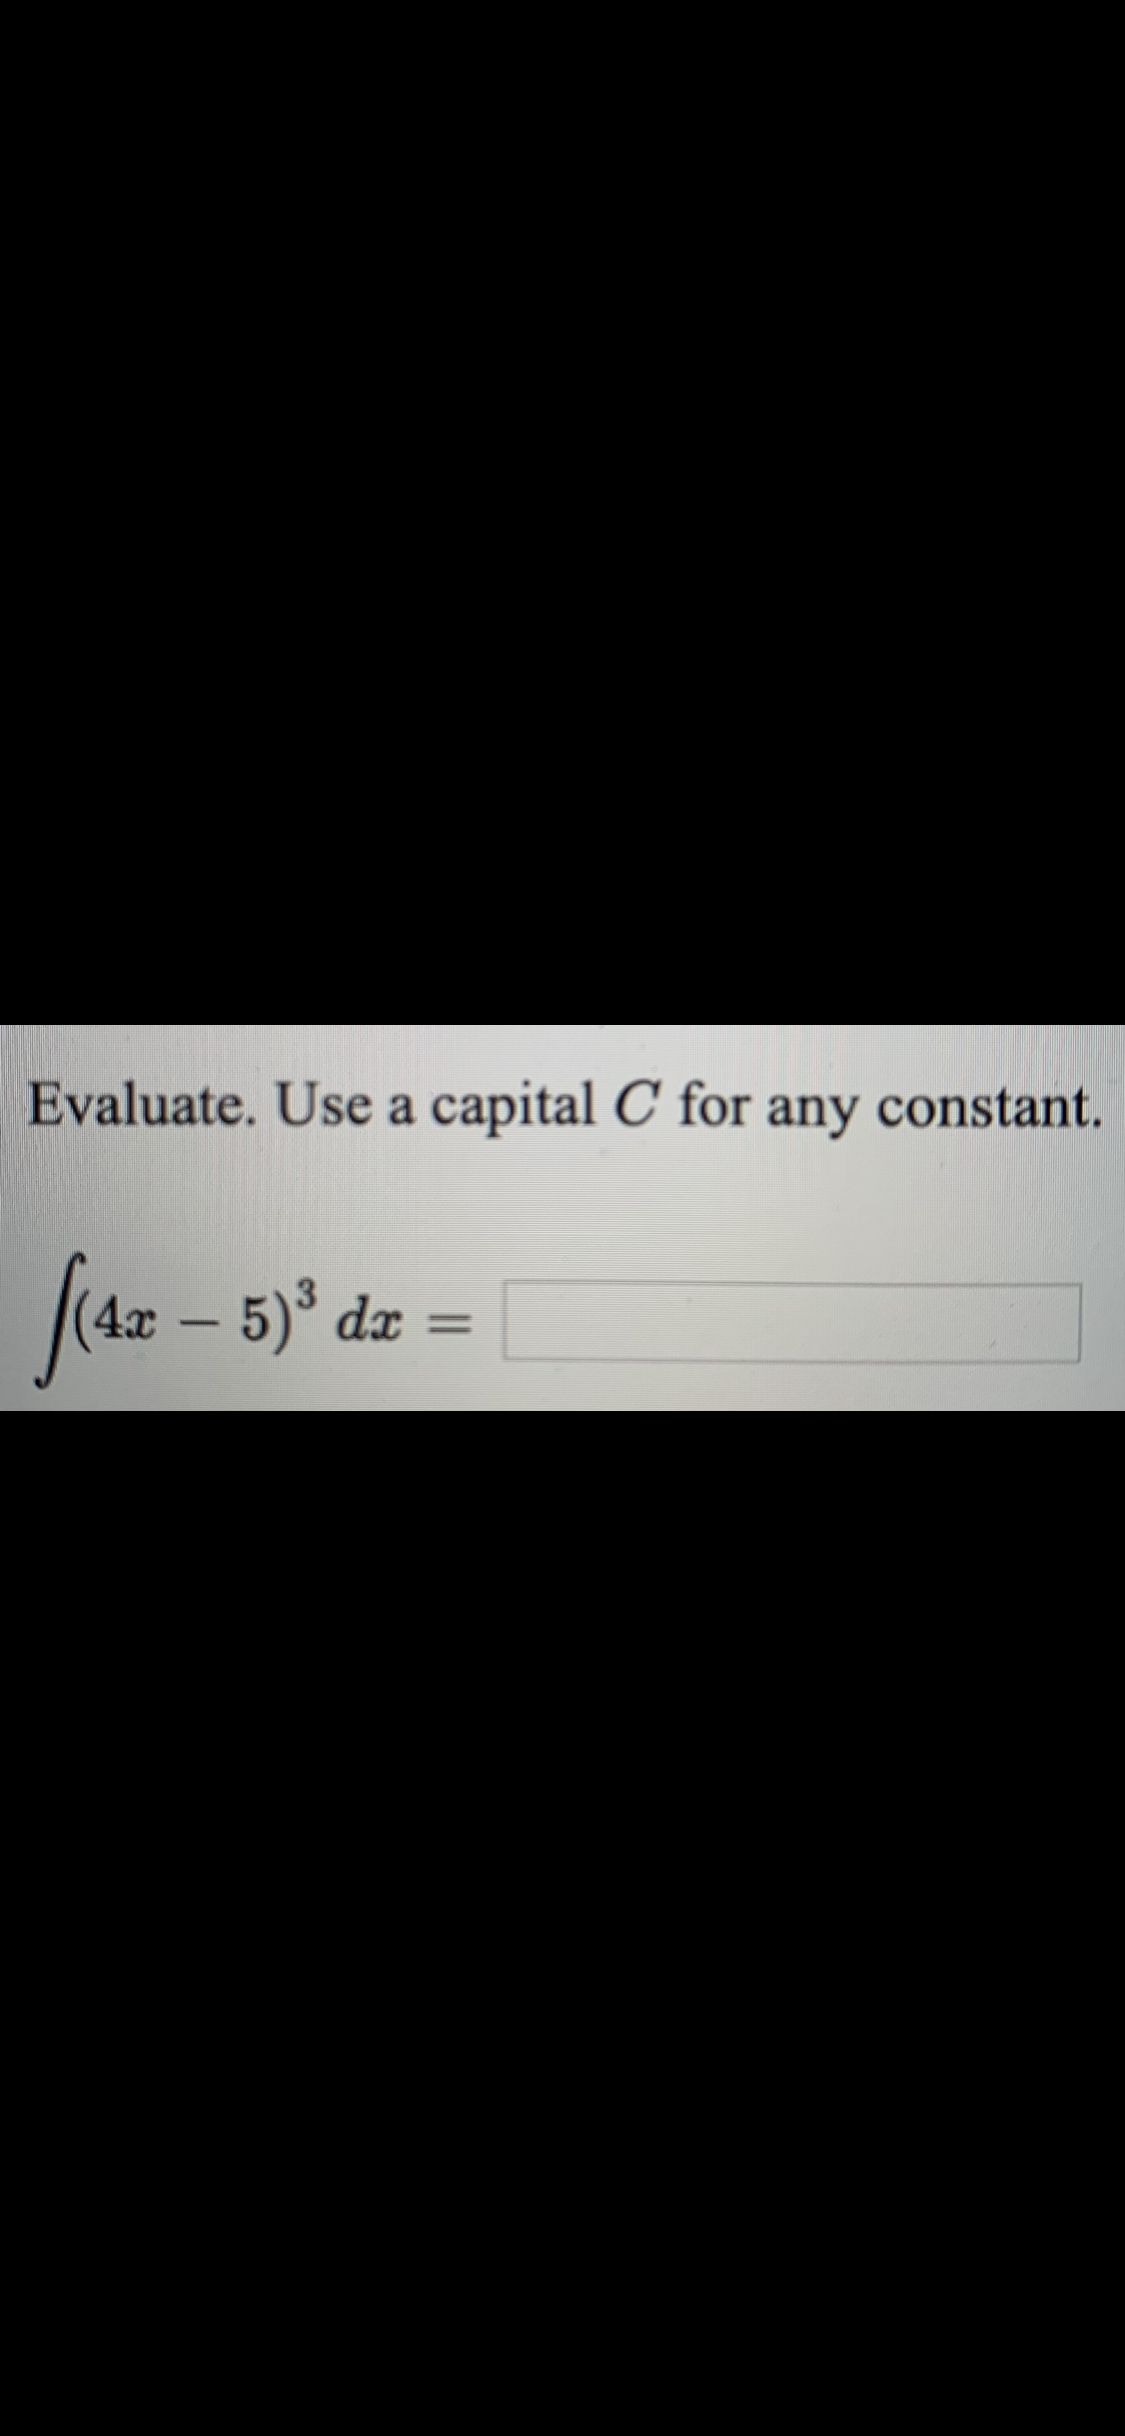 Evaluate. Use a capital C for any constant.
faz-
- 5)° dx =
%3D
